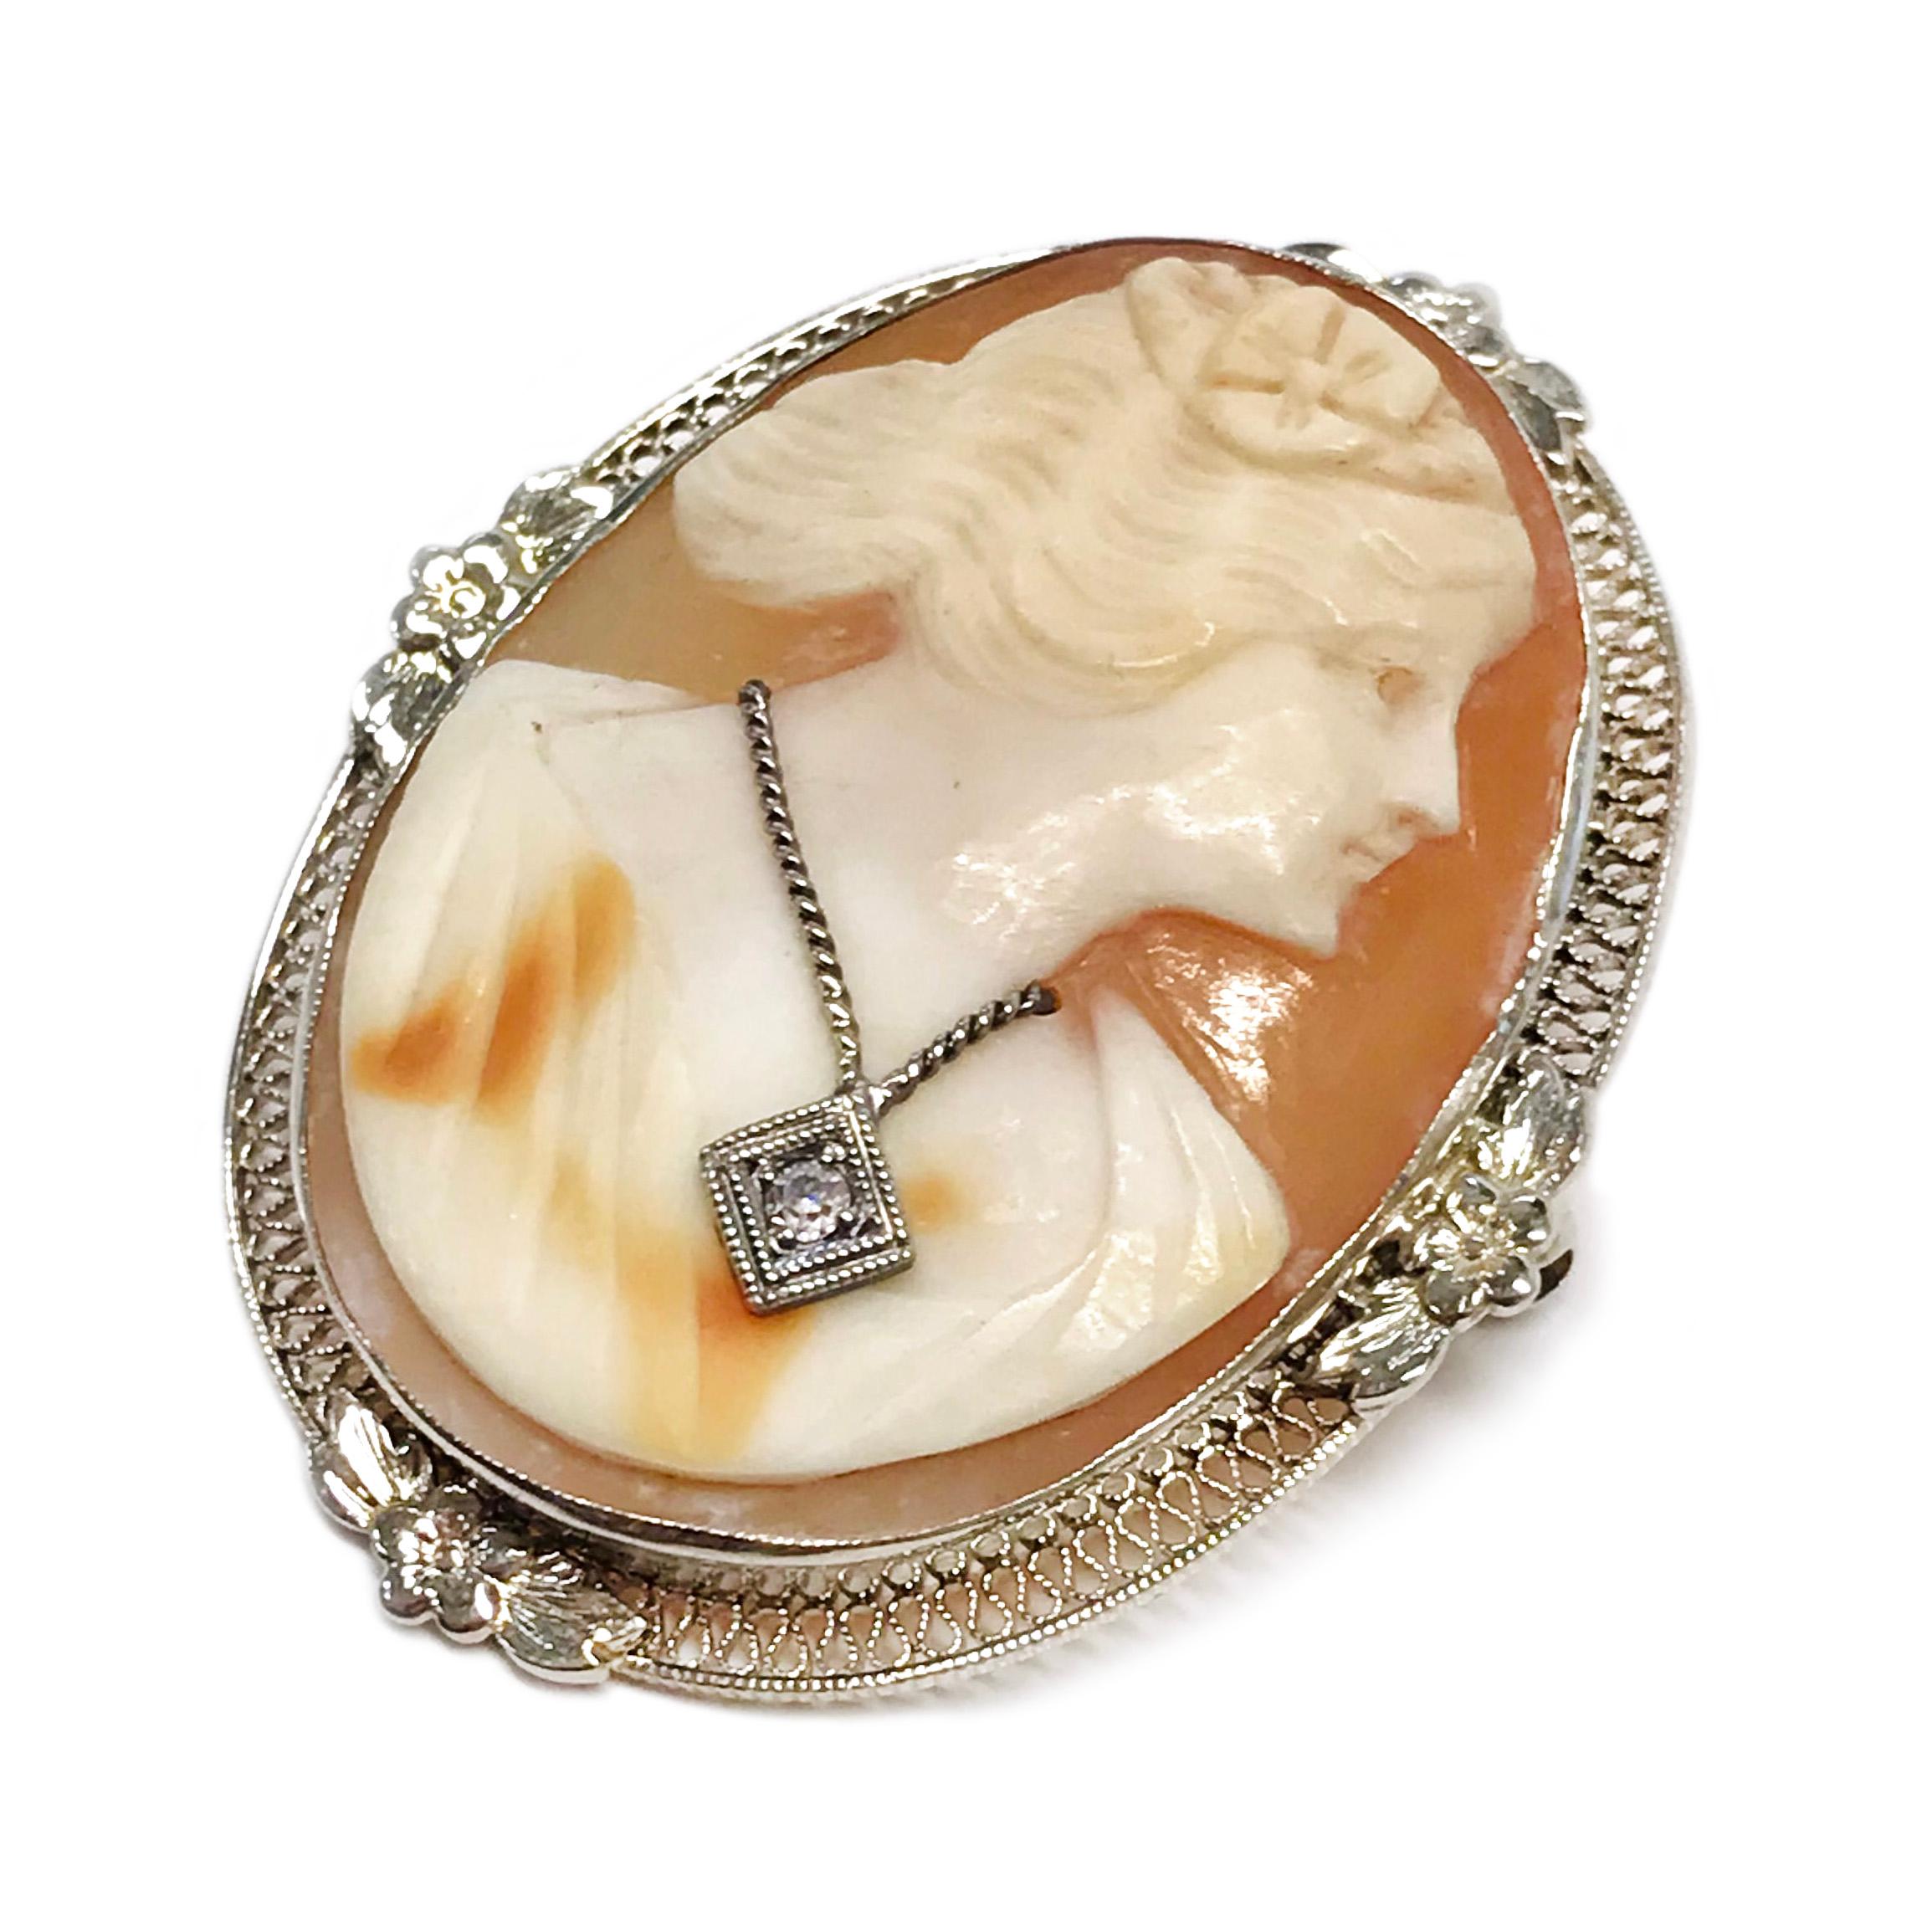 Art Deco 14 Karat White Gold Cameo Diamond Pendant Brooch. The oval cameo is bezel-set. The carved shell cameo is a profile of a woman with a flower in her hair wearing a white gold necklace, the necklace has a single-cut round 1.6mm diamond set in